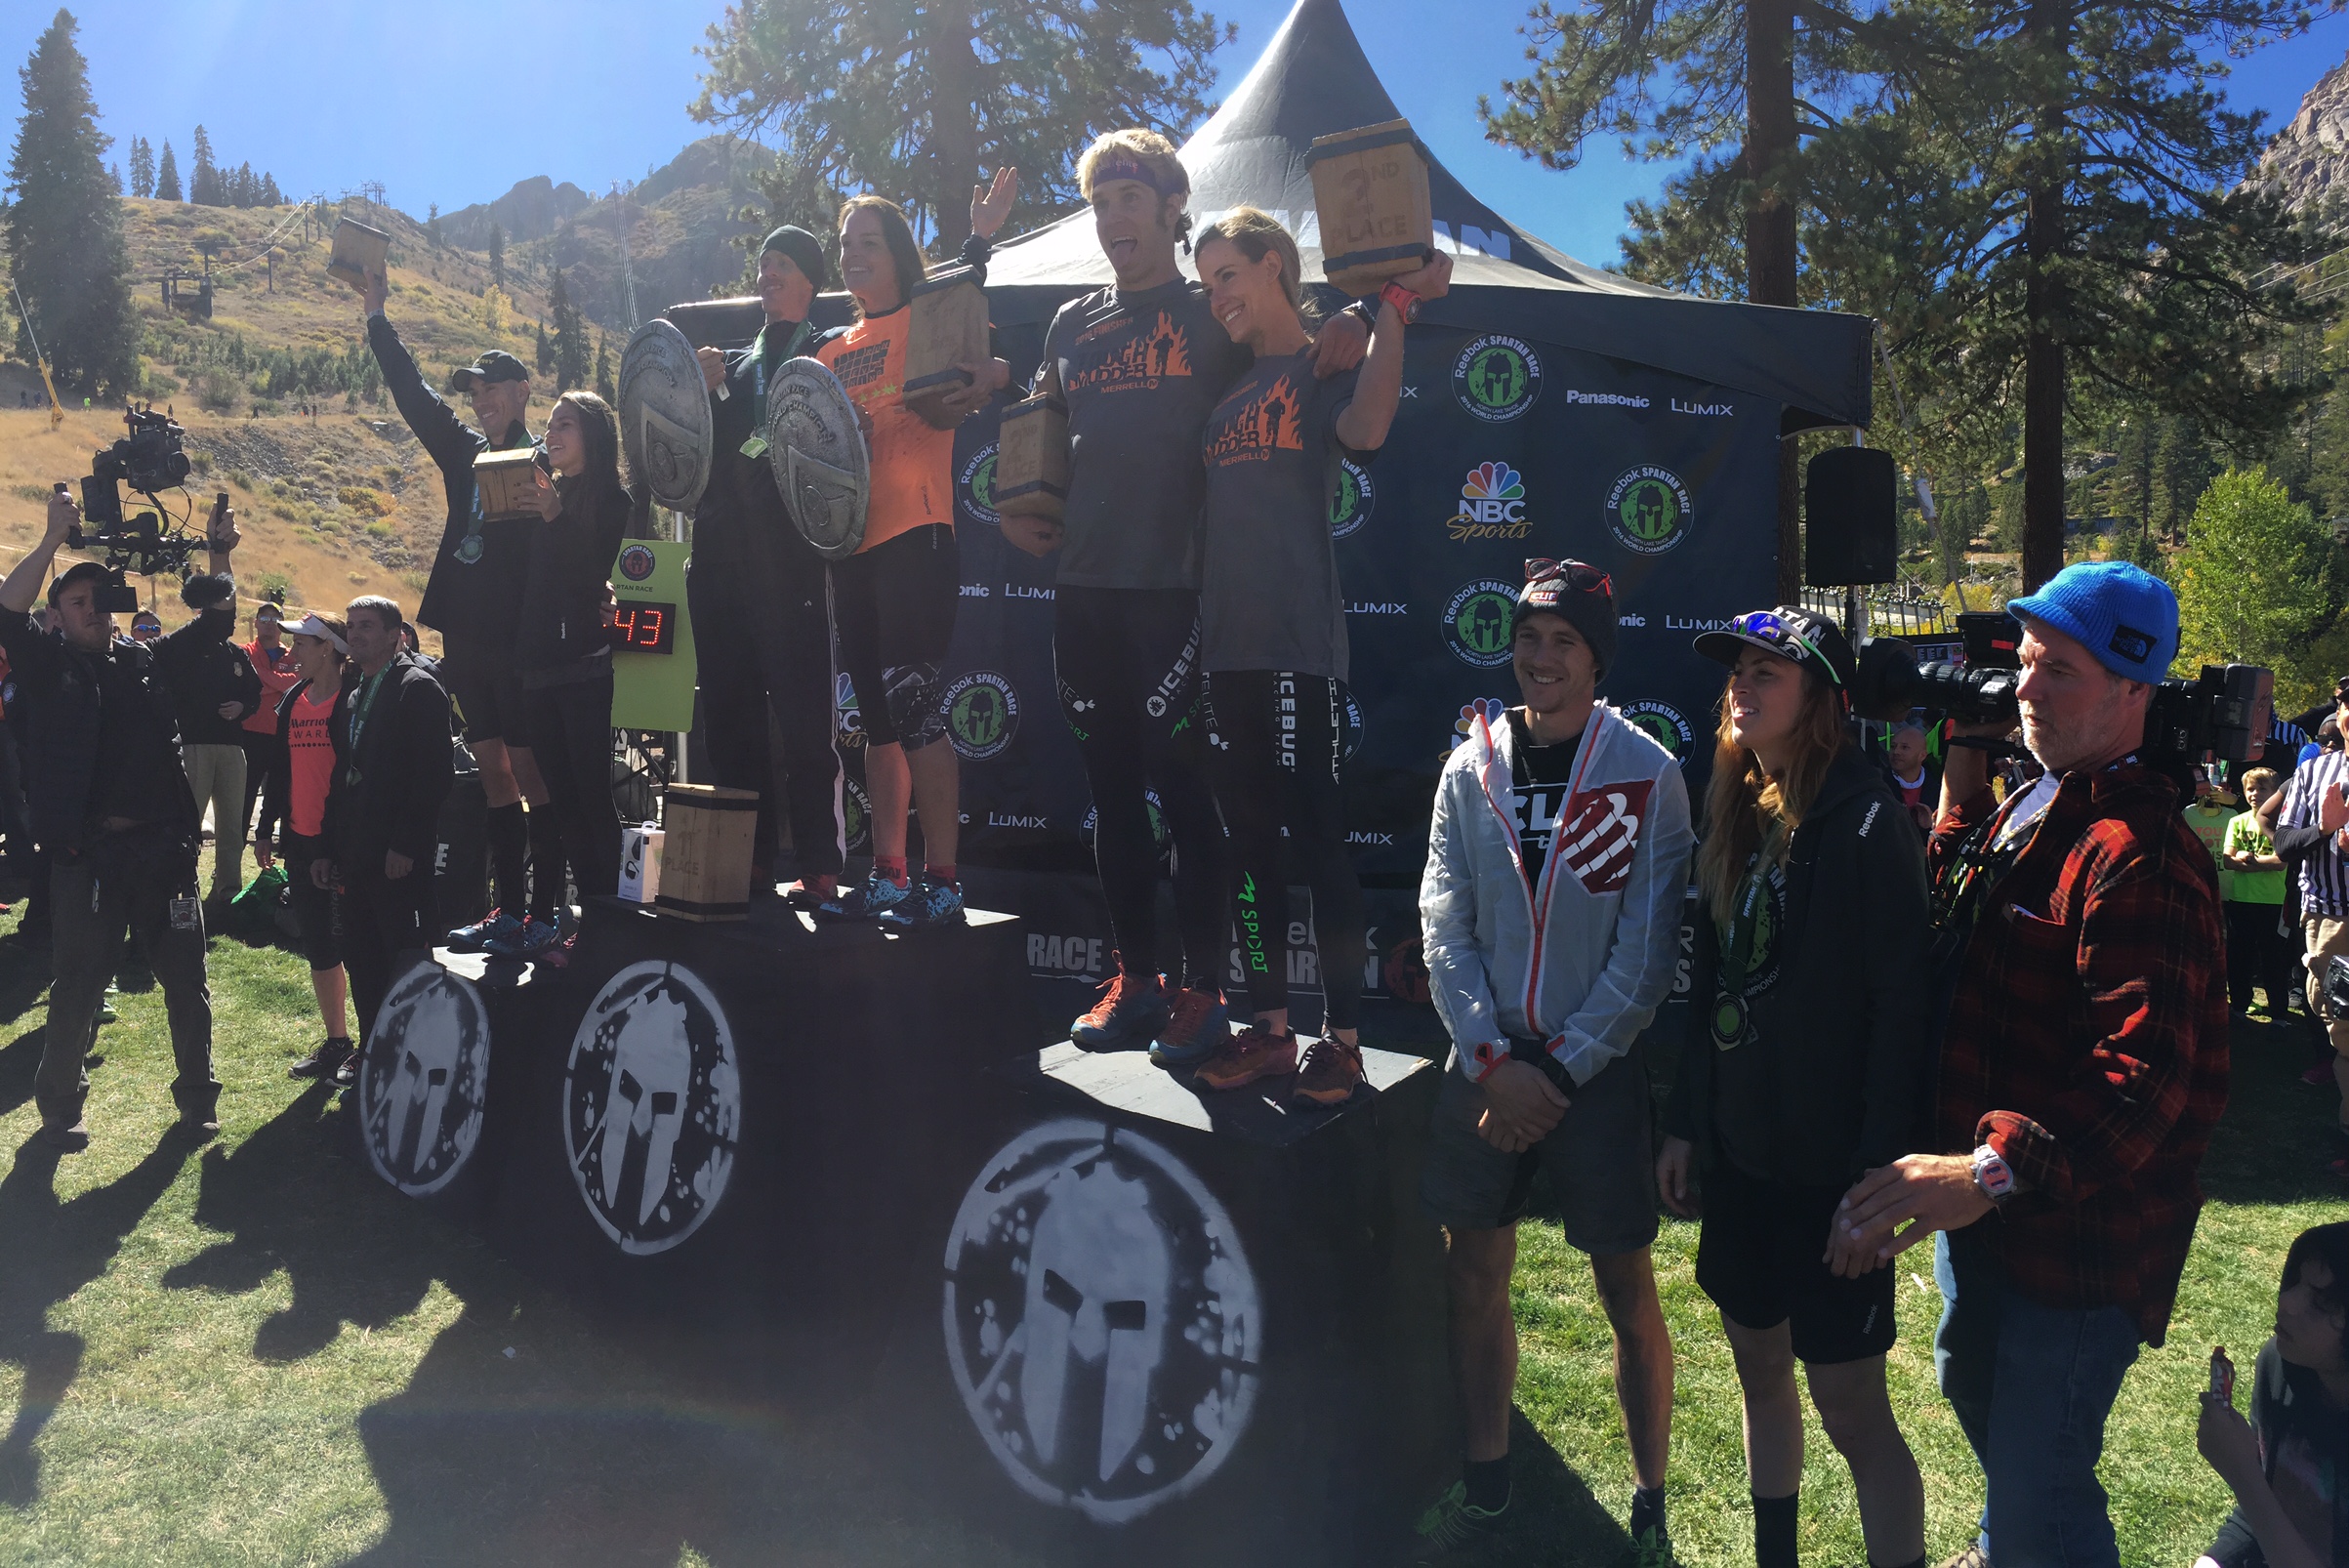 2016 Spartan Race World Championship Results